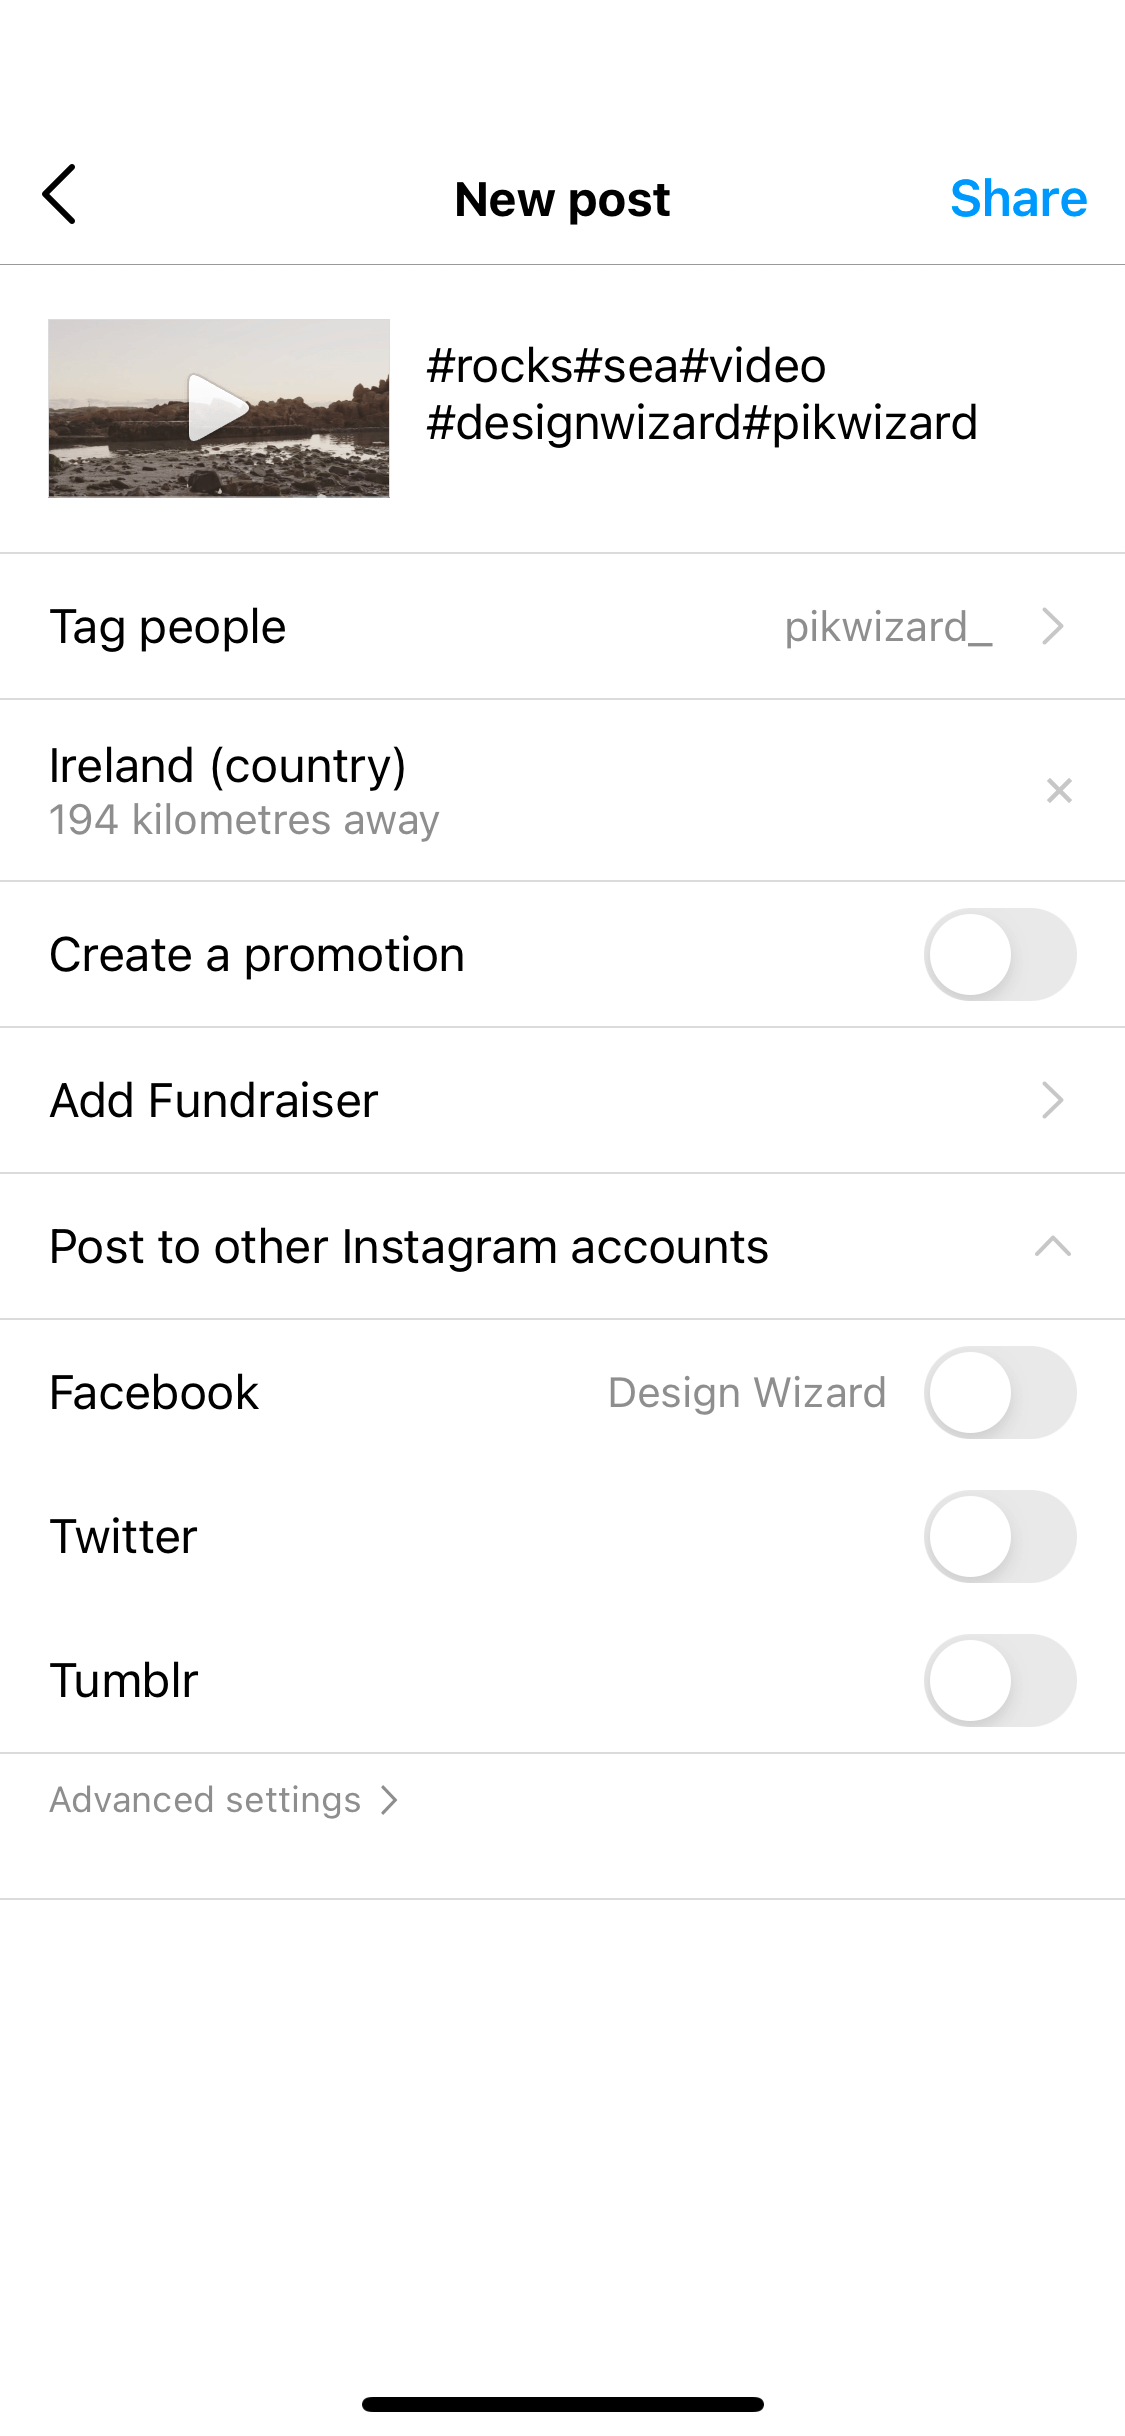 Upload video Instagram page - A guide on how to tag friends, add your location, and share your video on Instagram - Image